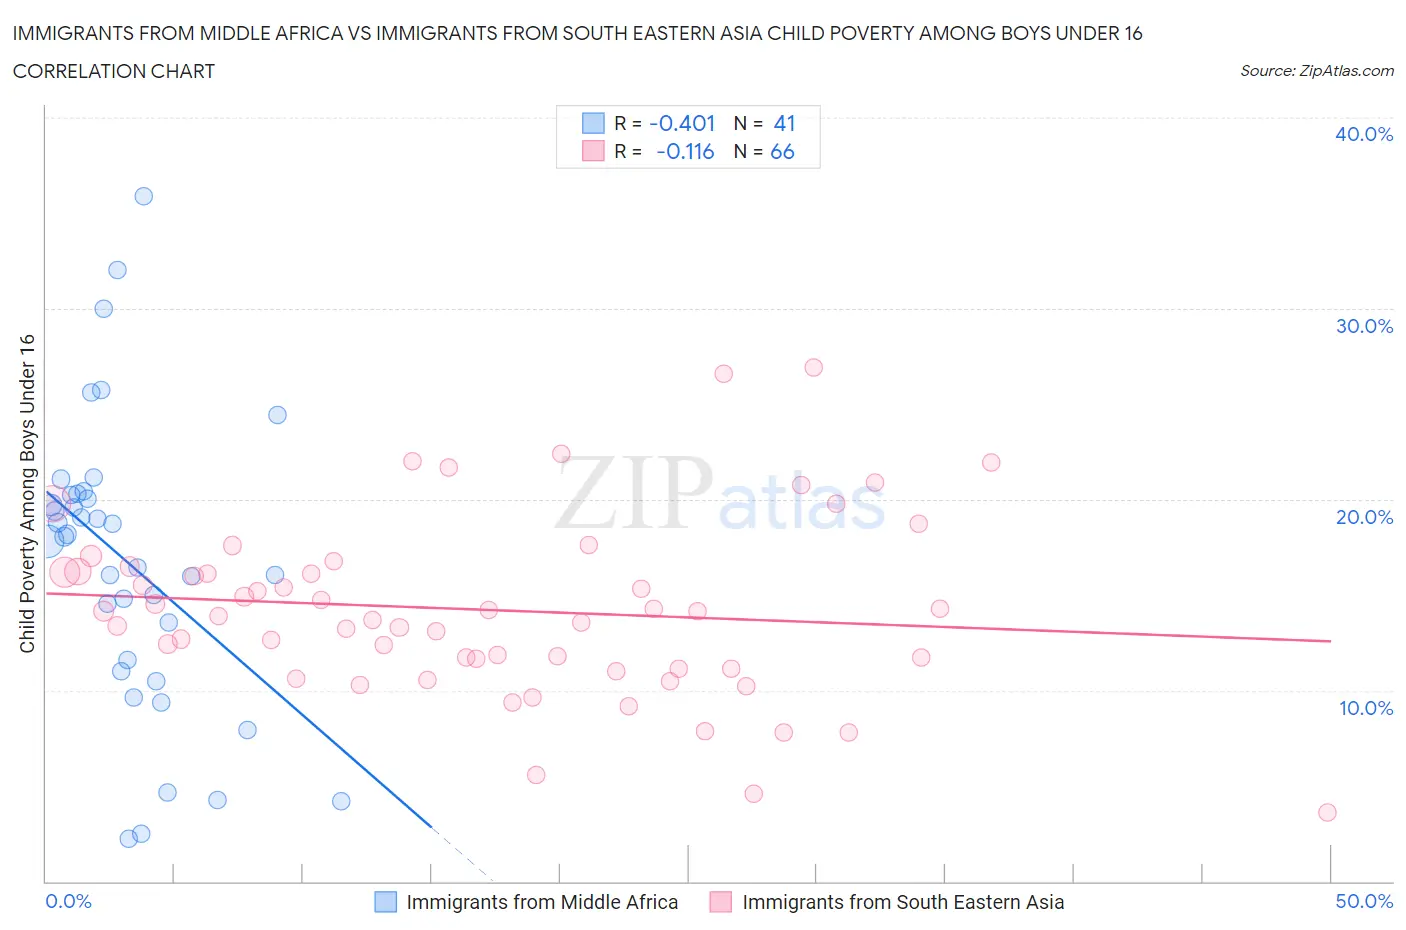 Immigrants from Middle Africa vs Immigrants from South Eastern Asia Child Poverty Among Boys Under 16